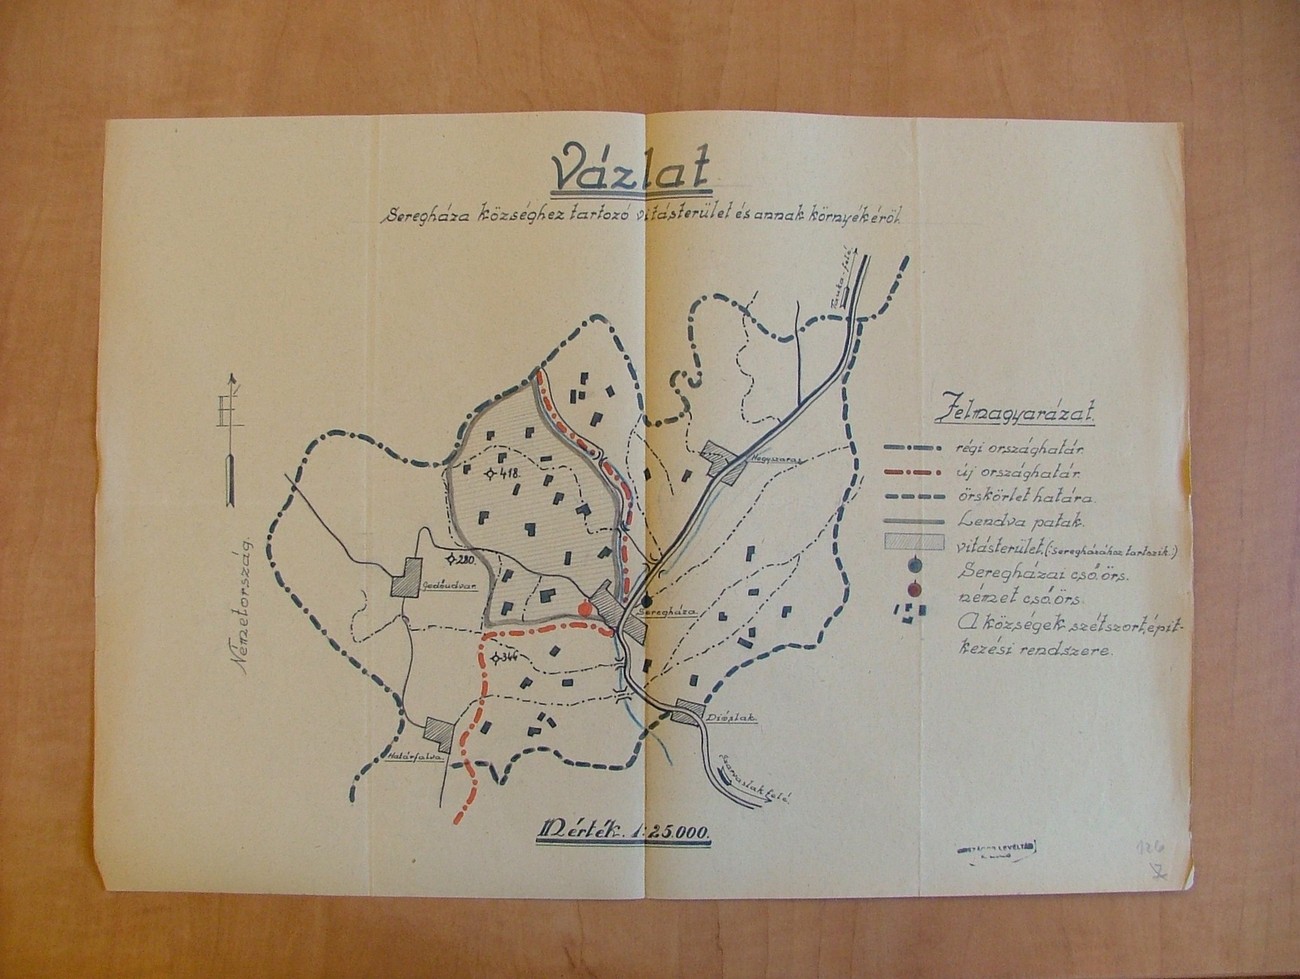 On 16 April 1941, Germans handed over control of Prekmurje to the Hungarians, except in four settlements in the northwest of the region. The sketch shows the German- Hungarian border at the settlement of Serdica (Seregháza), with the disputed area (vitás terület) drawn in. In Serdica the border ran along the Ledava River. On the bridge between the two parts of the village, a German officer drew the border with his boot; the subject of dispute was a mill on the Hungarian side of the village, which was owned by Germans. Border crossings and a limited transfer of goods were possible but under strict German supervision. People were not allowed to trade in livestock and it had to be marked (D for Germany and U for Hungary). Source: MNL OL K-64 - 1942 - 41.(96. cs.).